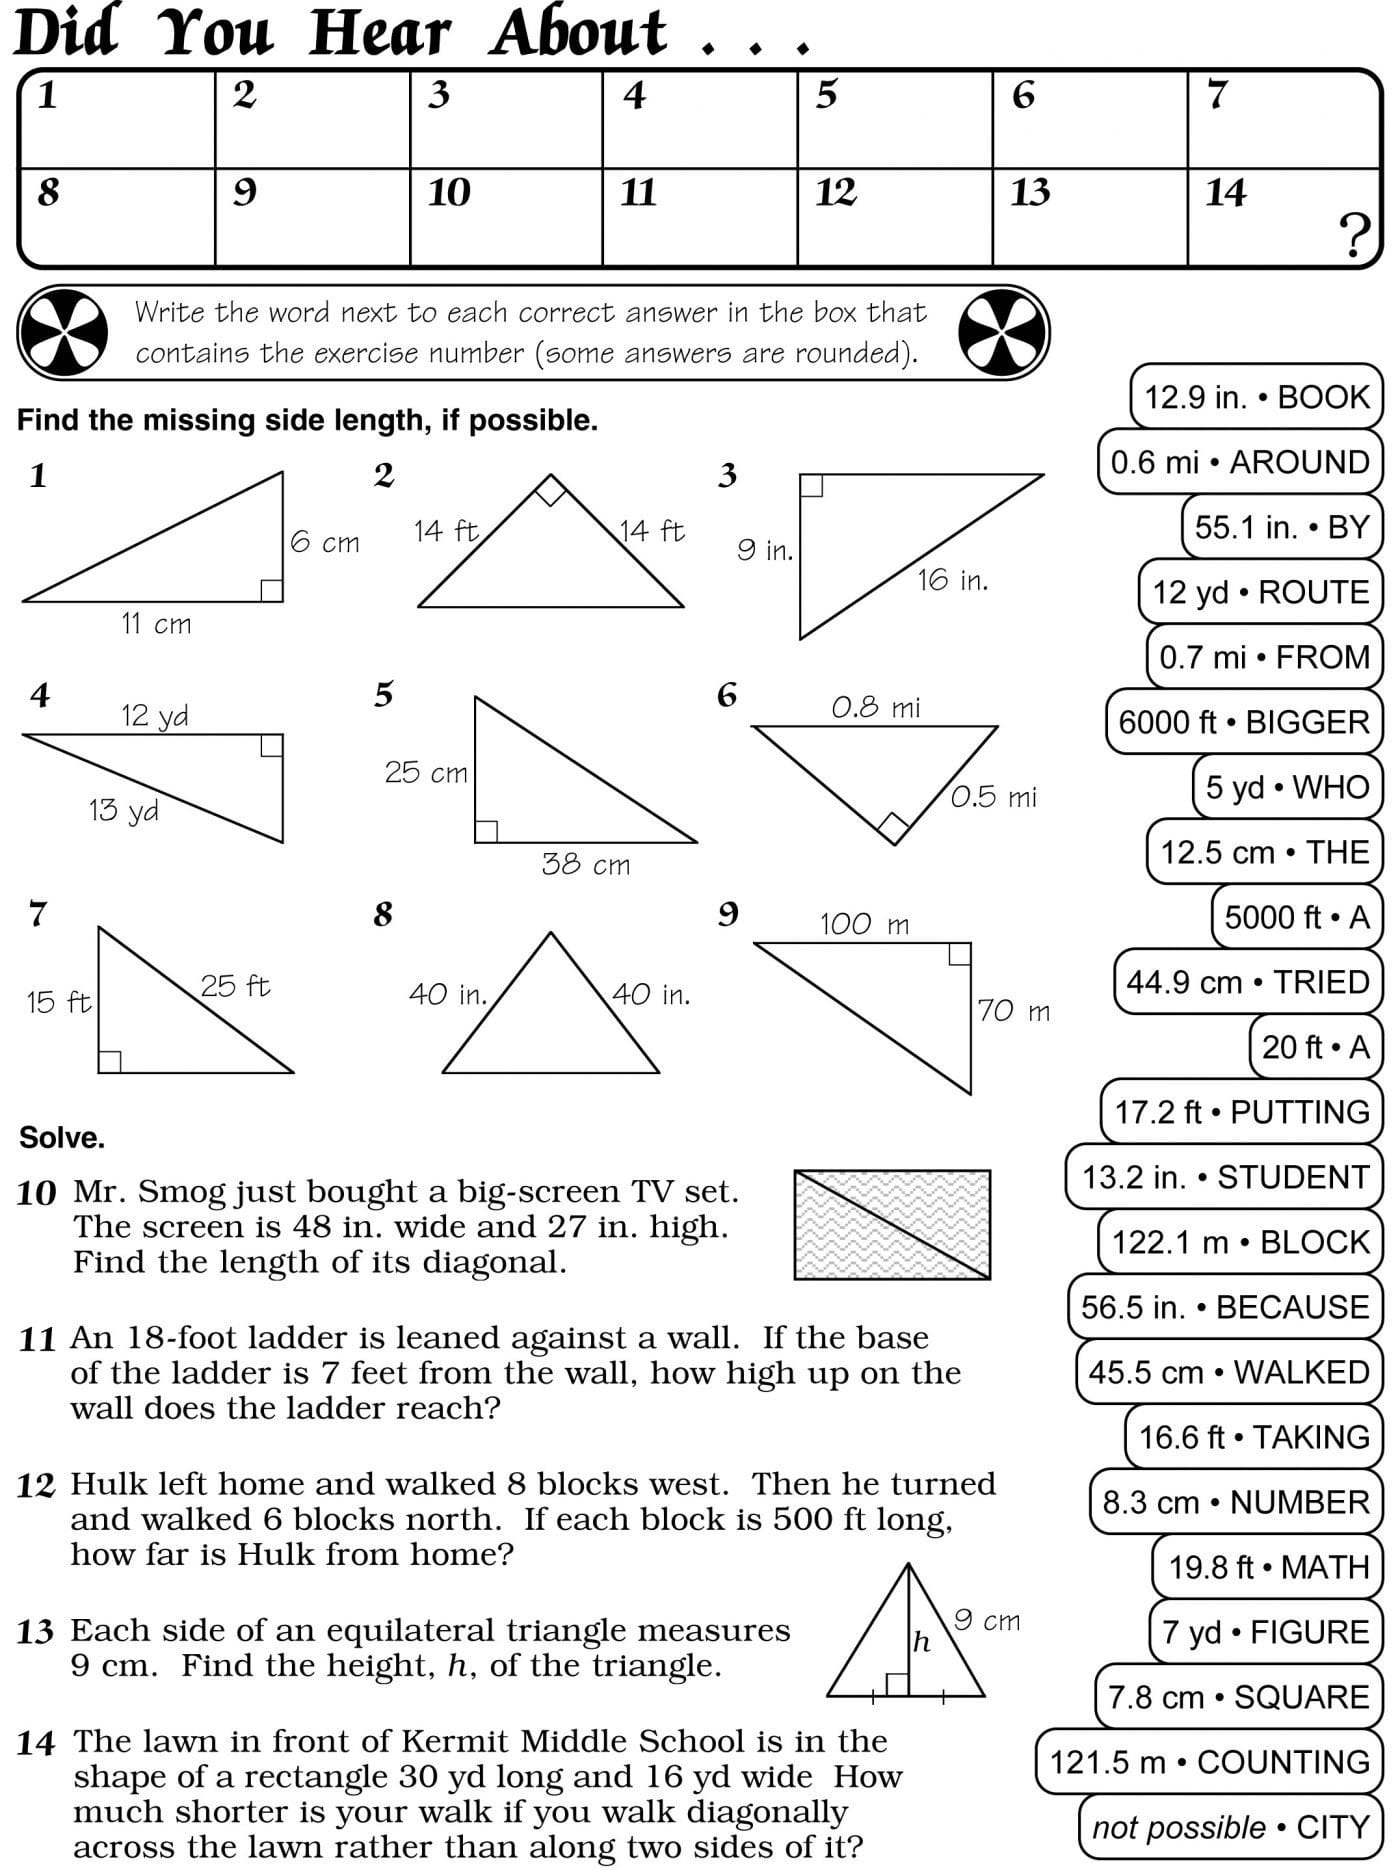 Ideas Of Worksheet Answers To Did You Hear About Math Worksheet Hate Along With Did You Hear About Worksheet